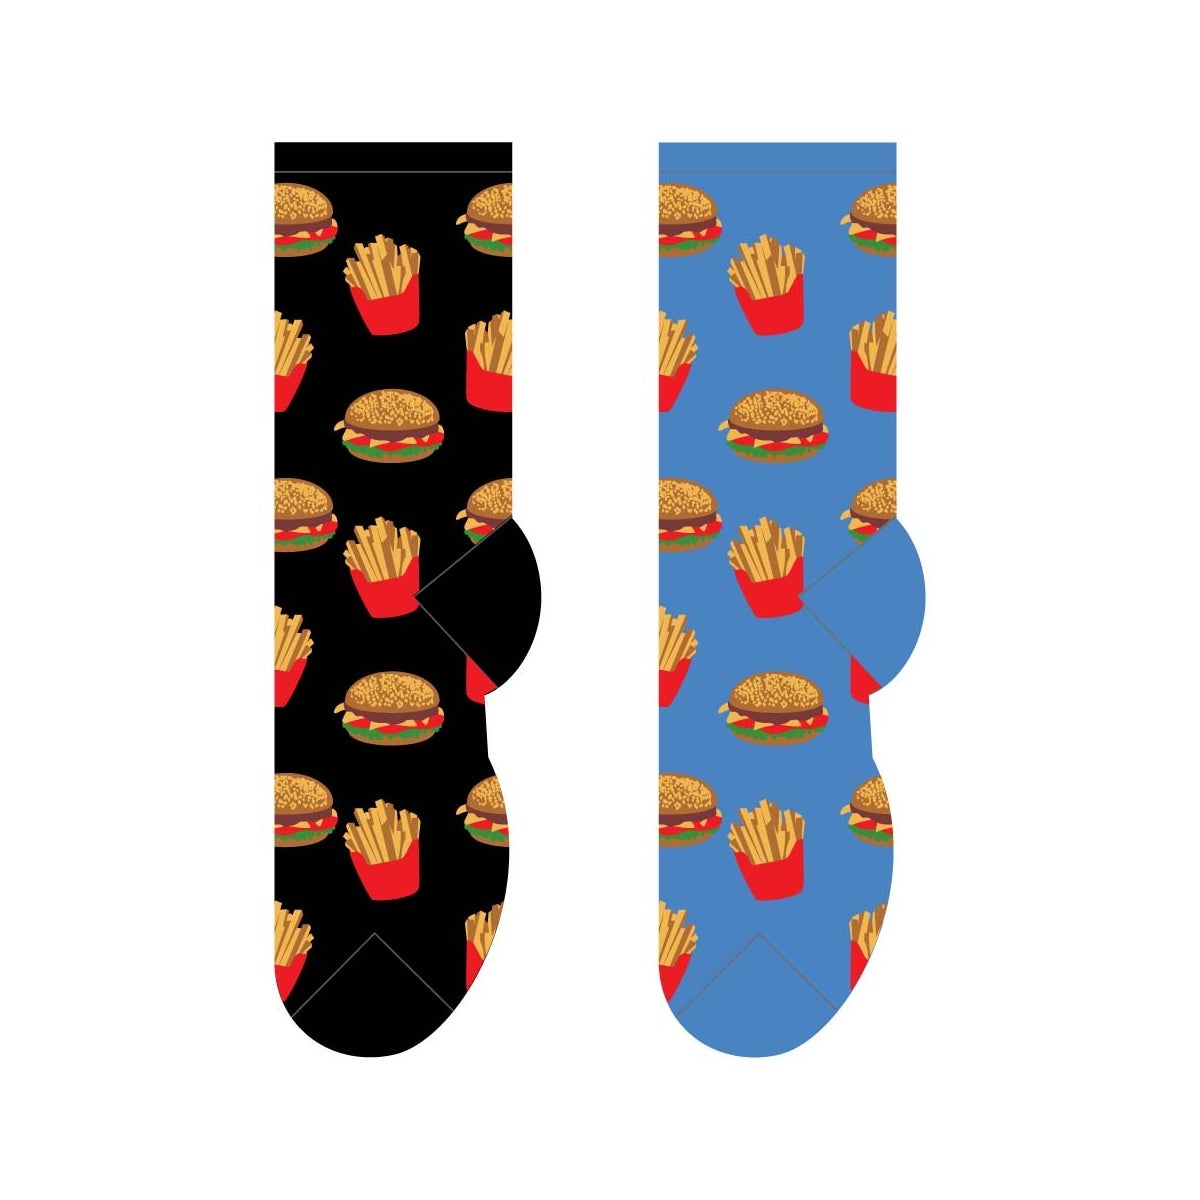 Burgers and Fries - 6 pairs each of 2 colours